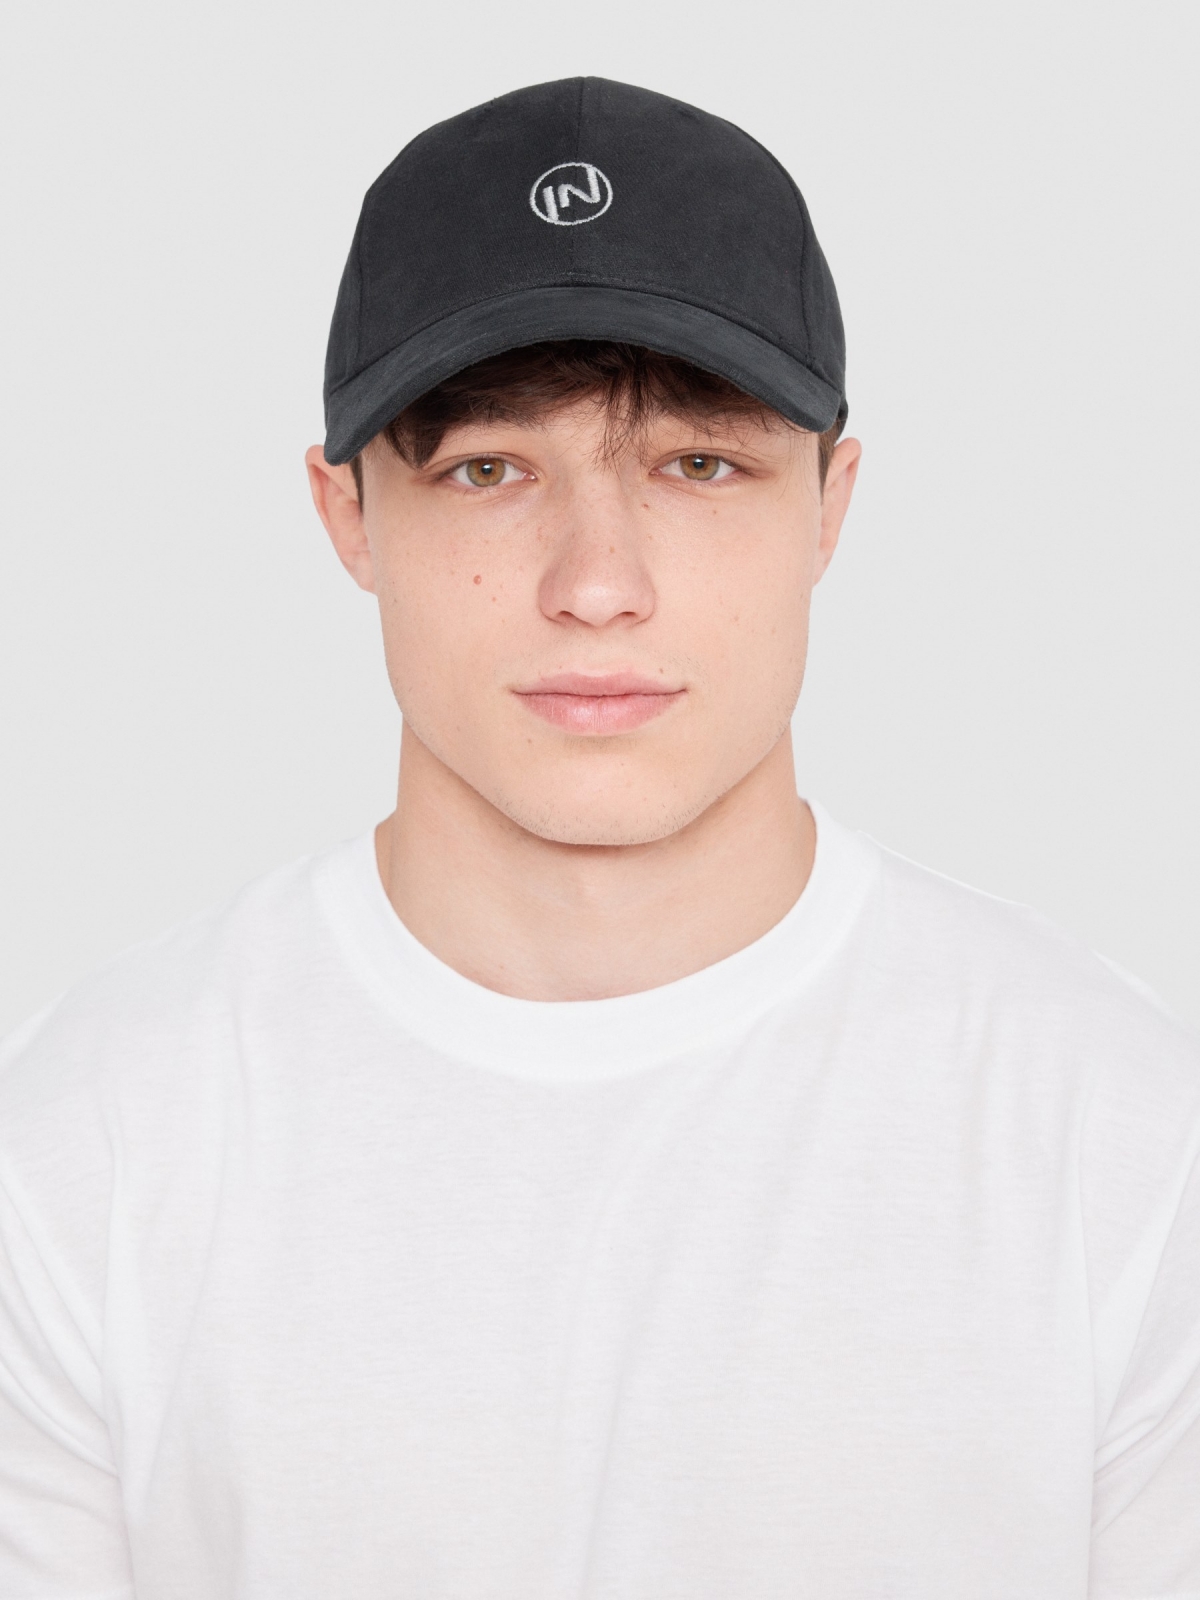 Cap logo IN black with a model